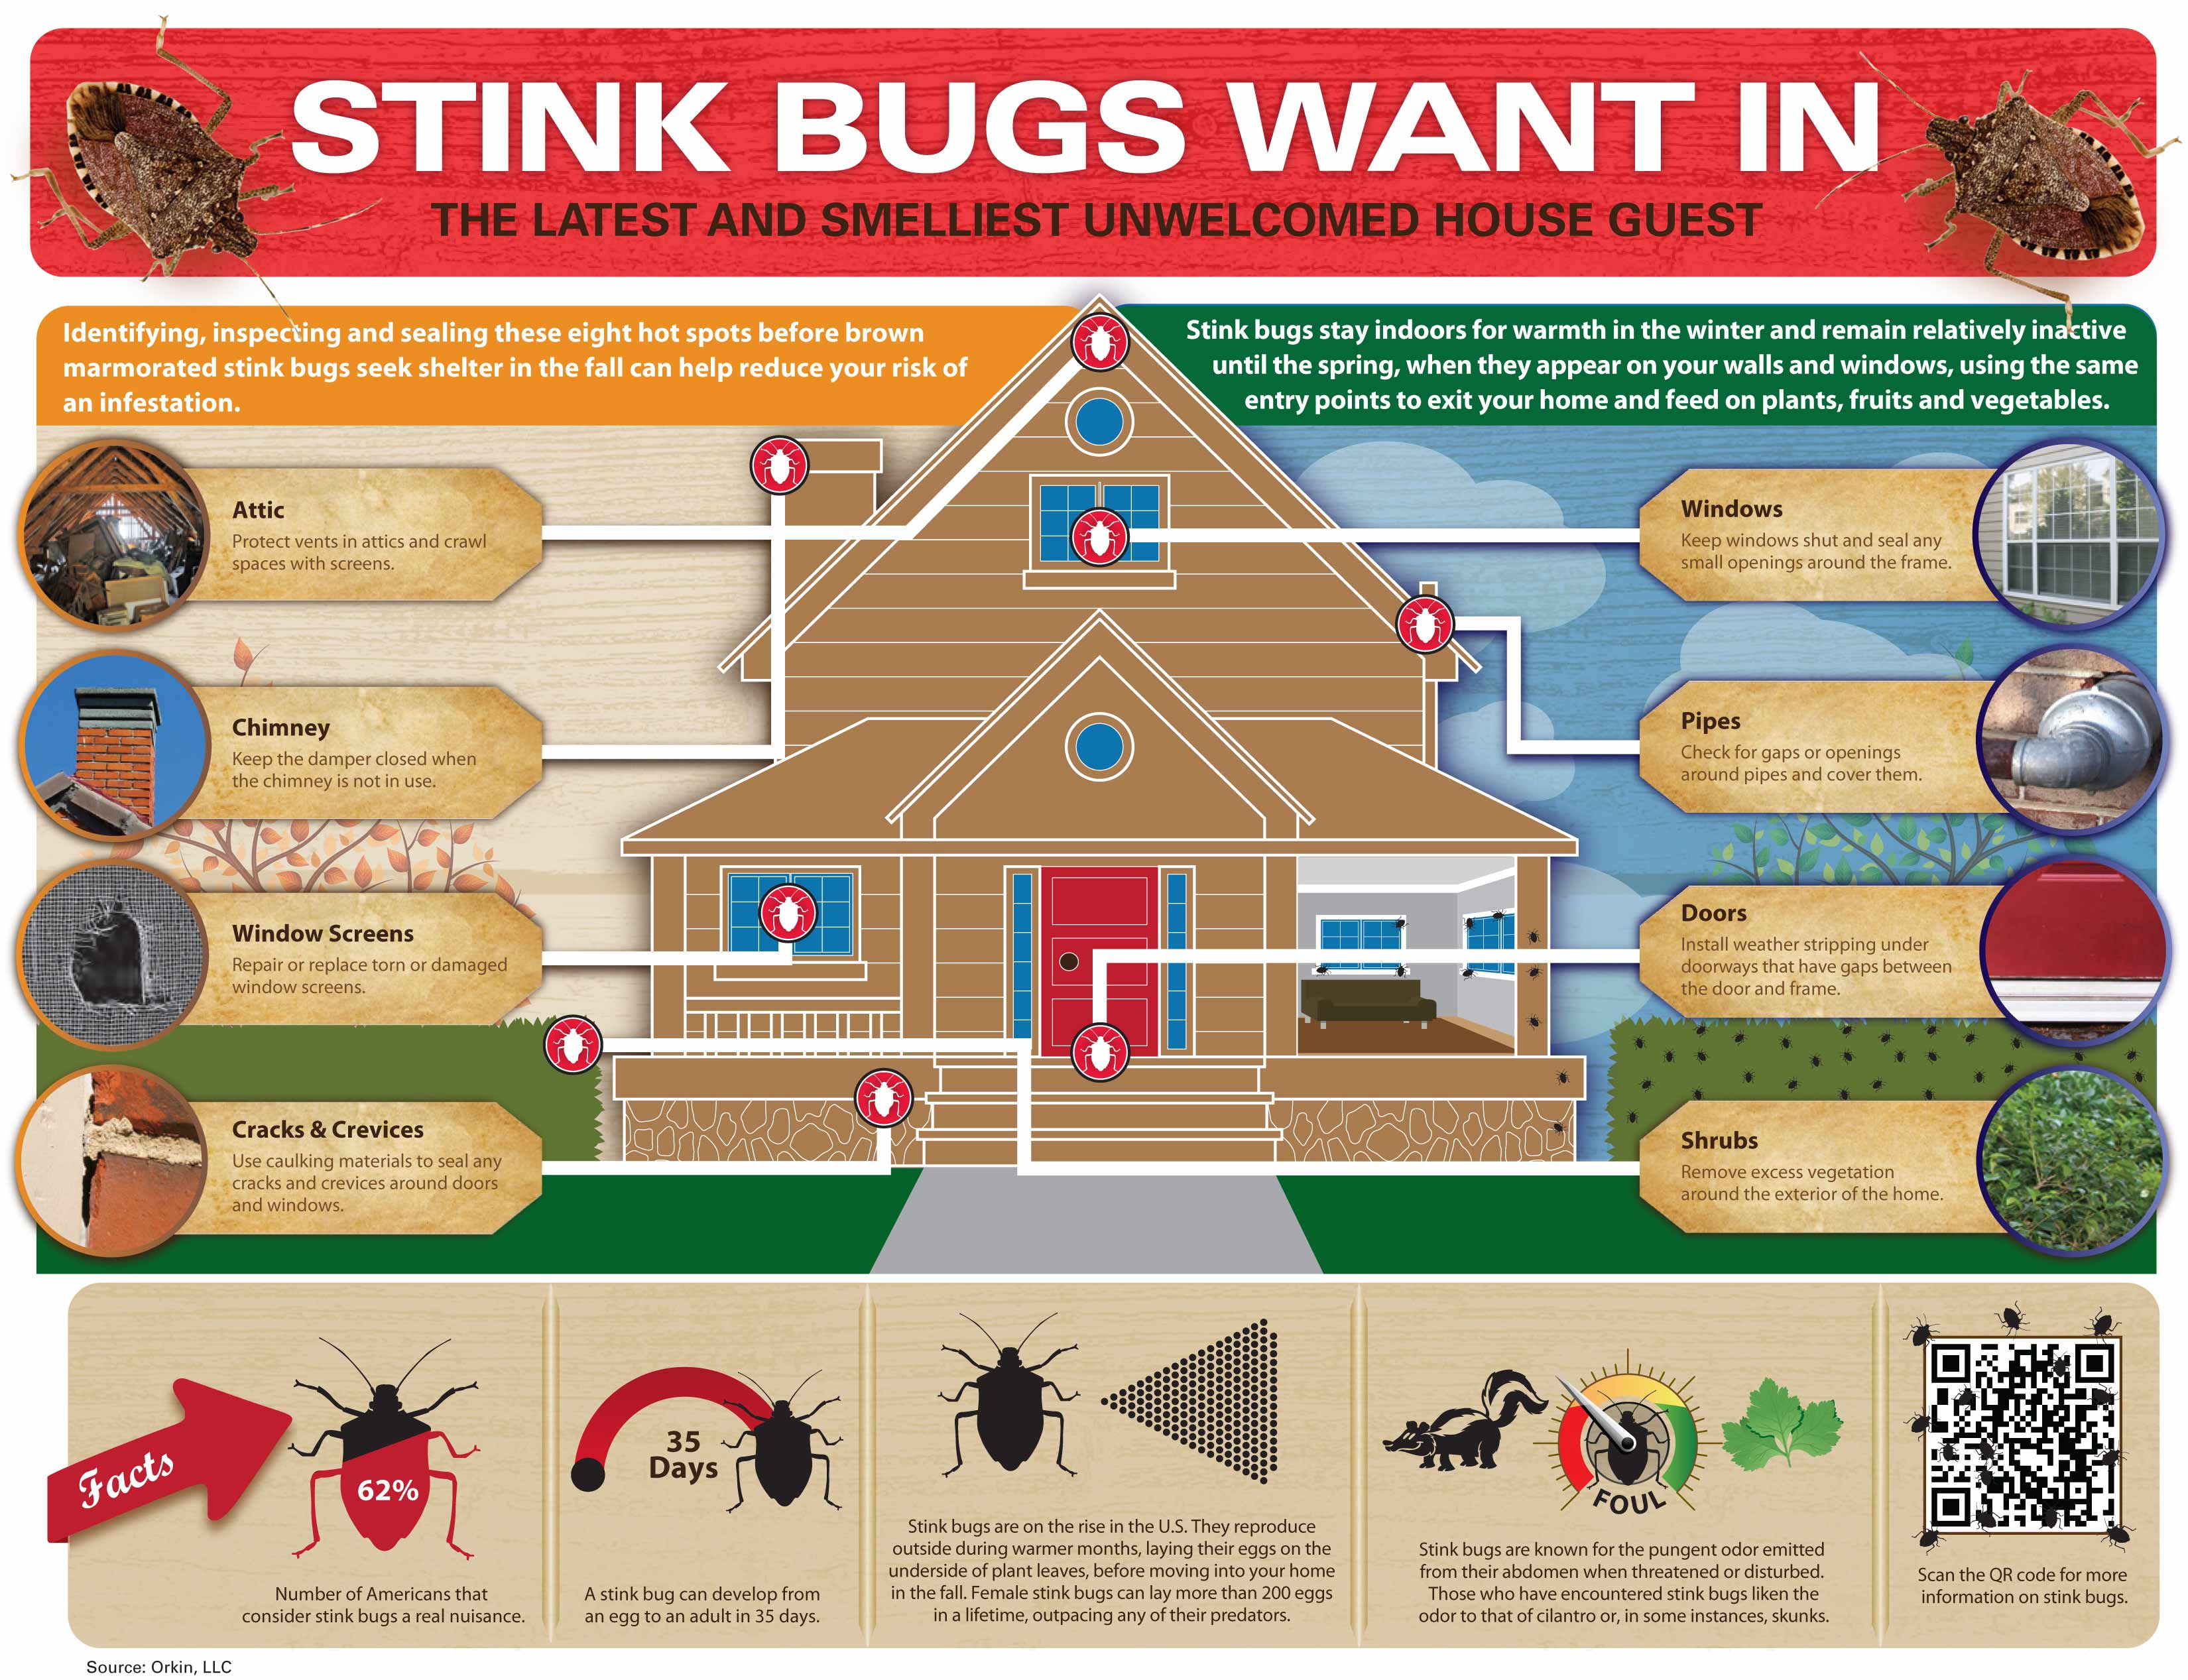 Stink bugs: Why are they in my house? How to keep them out